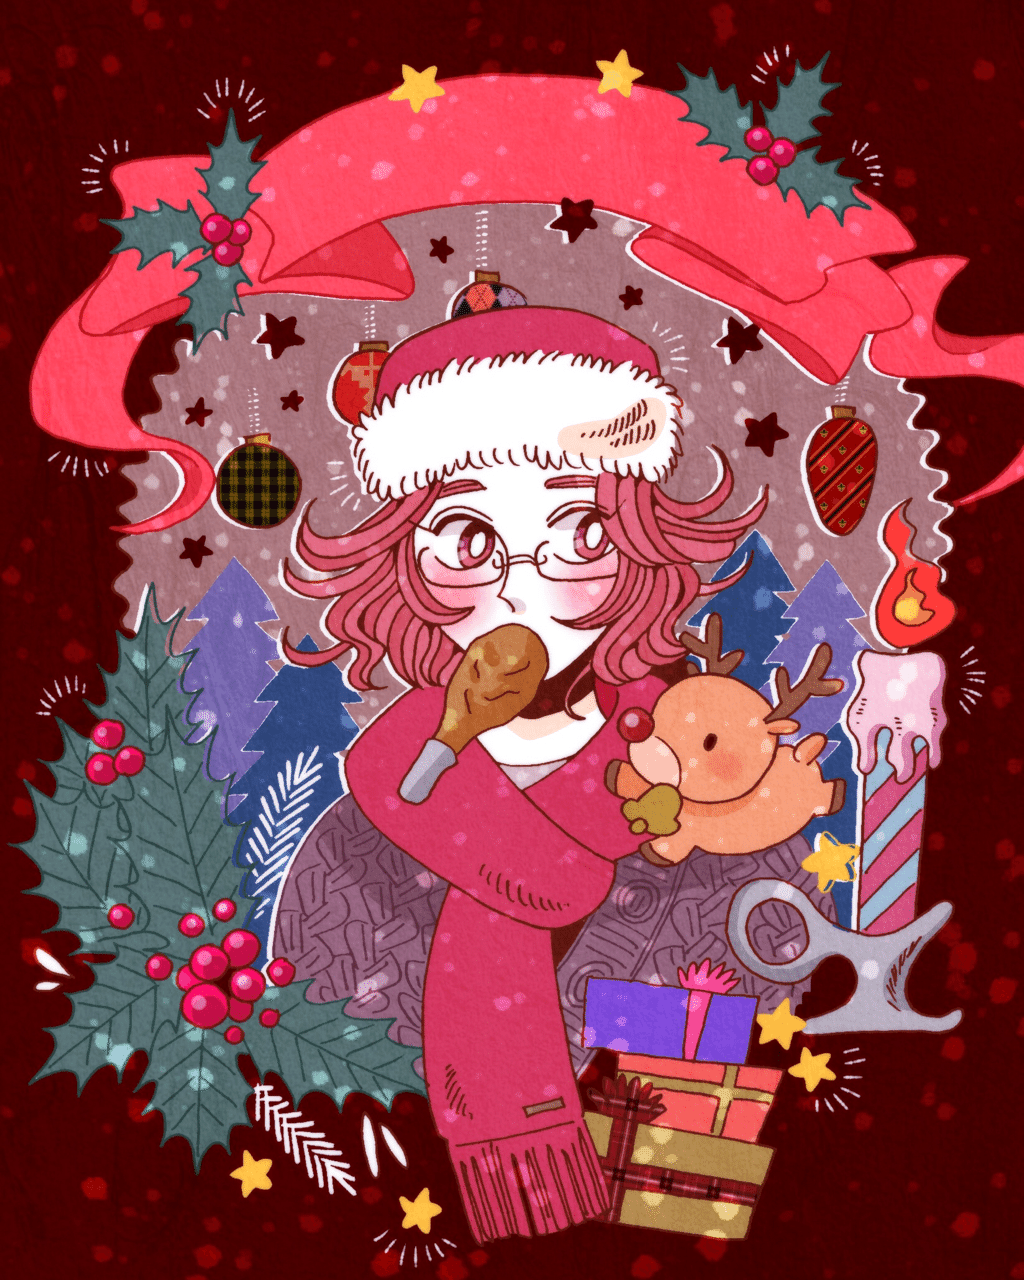 Merry Xmas 今年のクリスマス絵でした 松浦 お順 Note